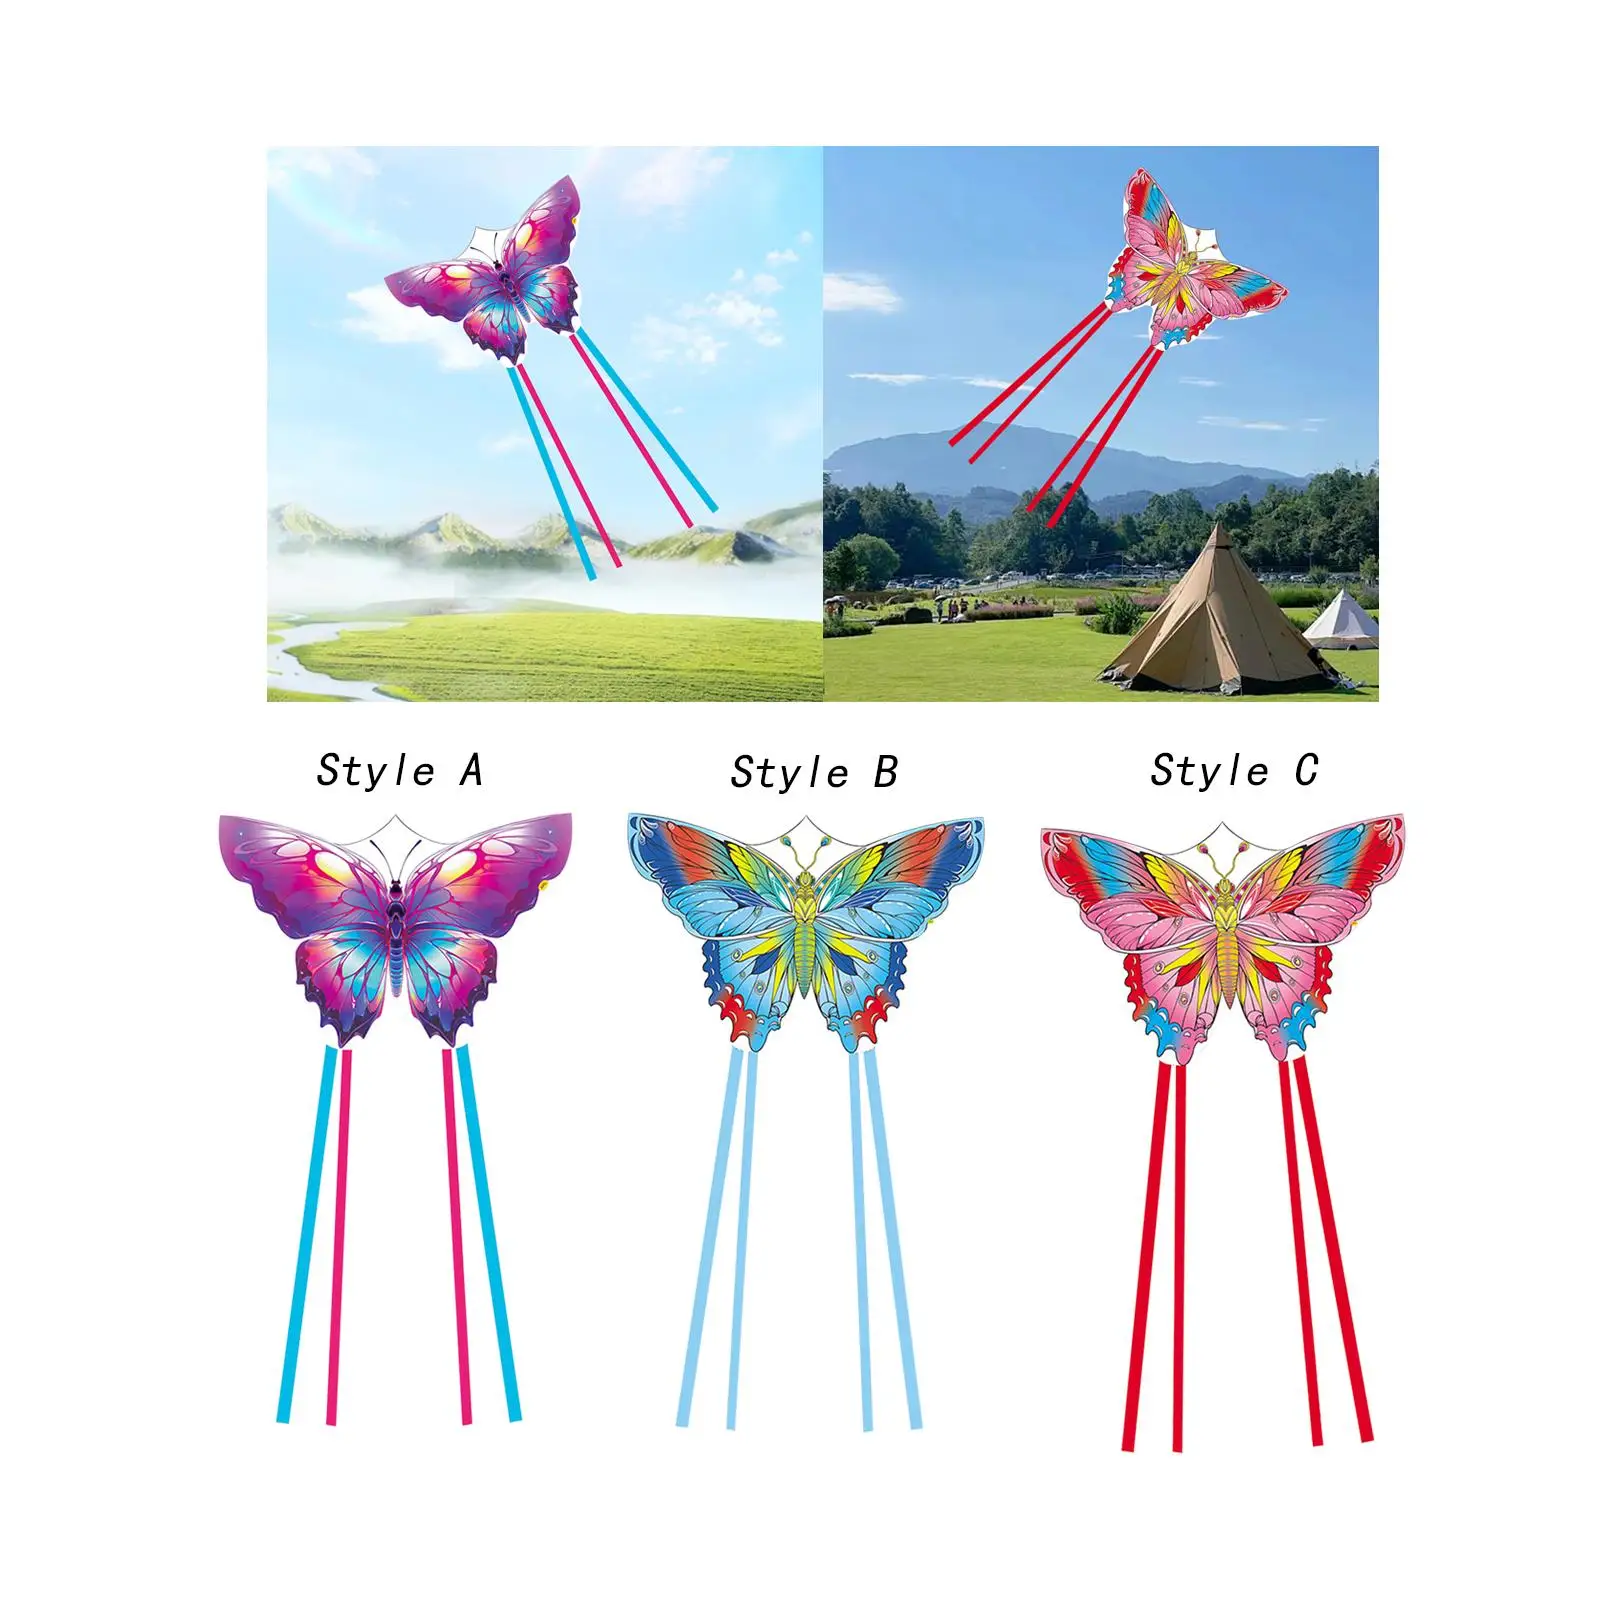 Huge Kite Sports Kite Cartoon Single Line Outdoor Fly Kite Game Large Giant Kites for Holiday Yards Farm Outdoor Activities